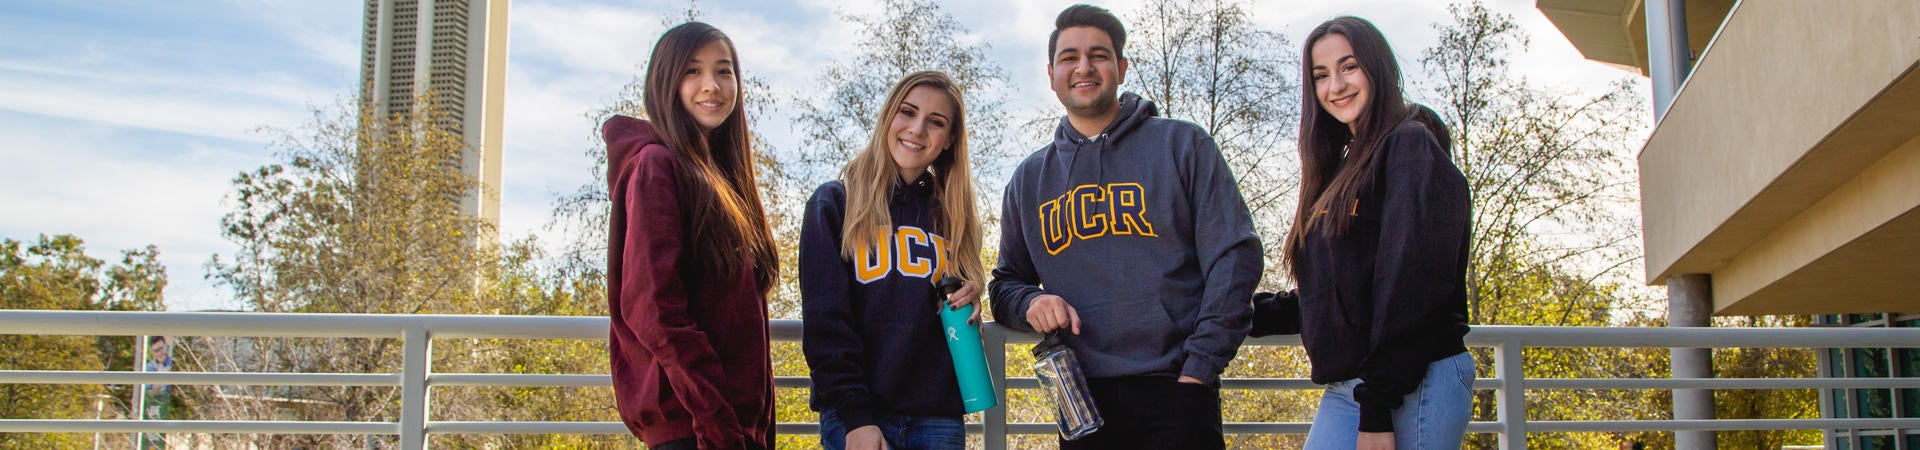 Students wearing UCR Gear from Campus Bookstore